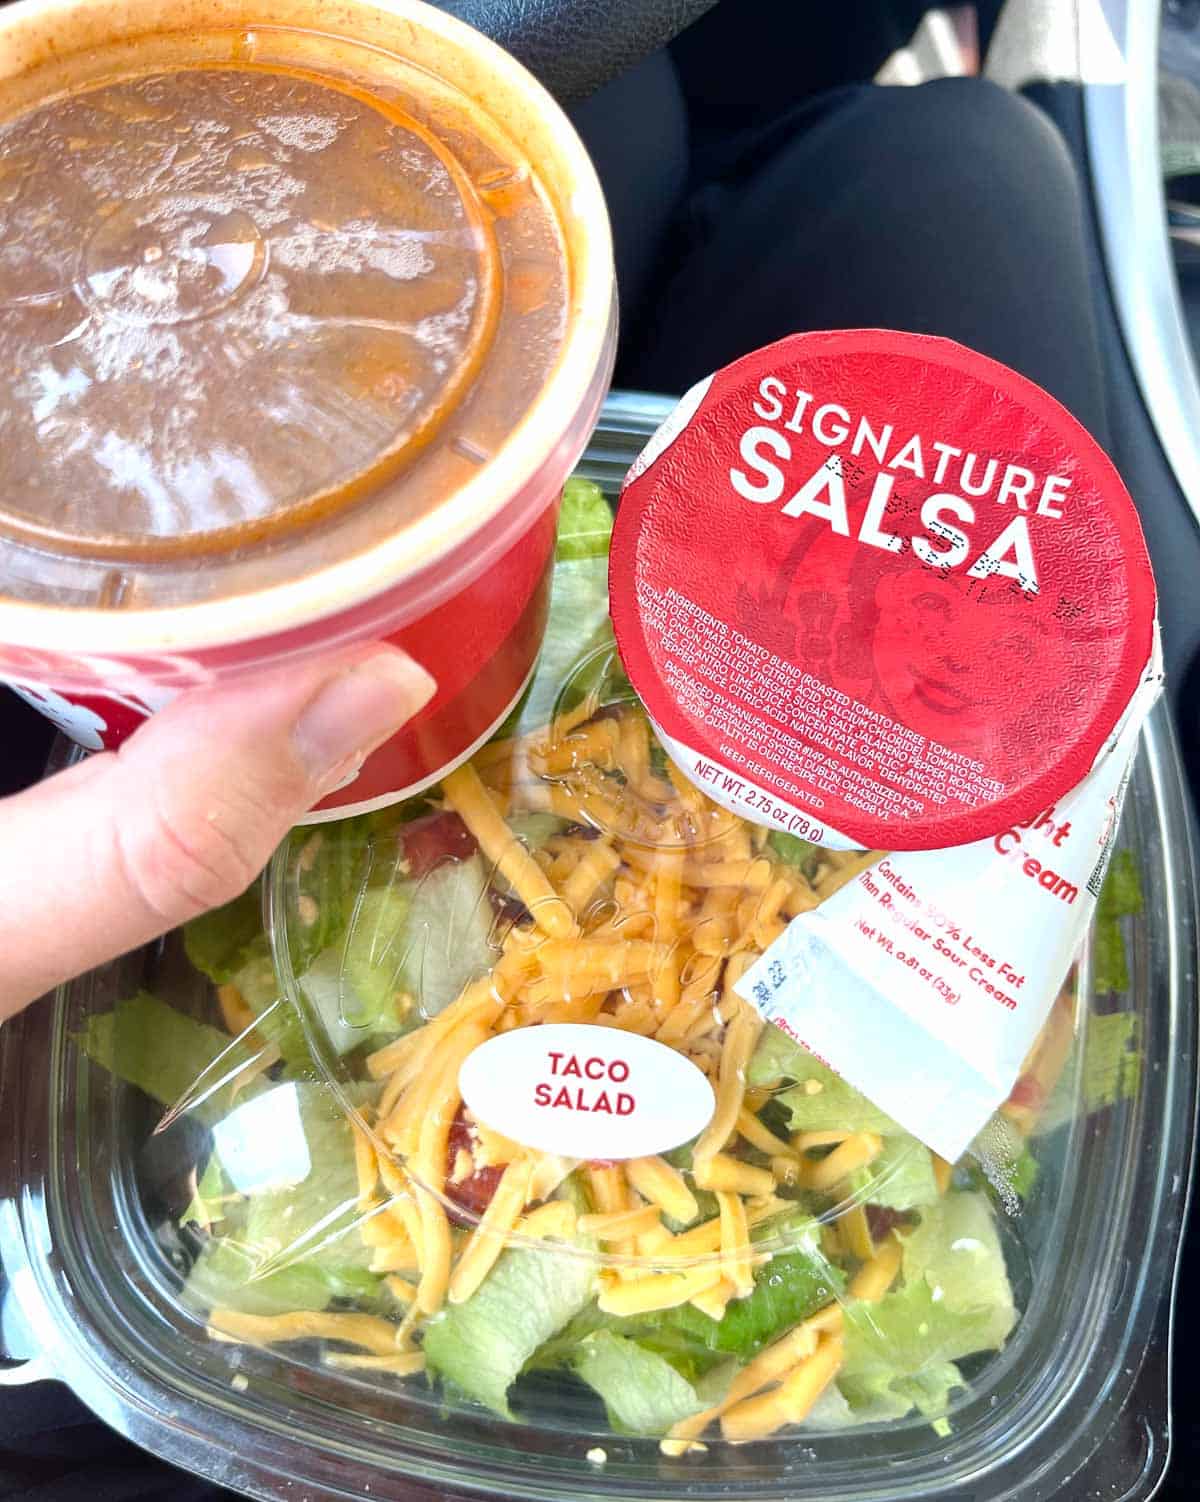 Wendy's salad in a plastic container